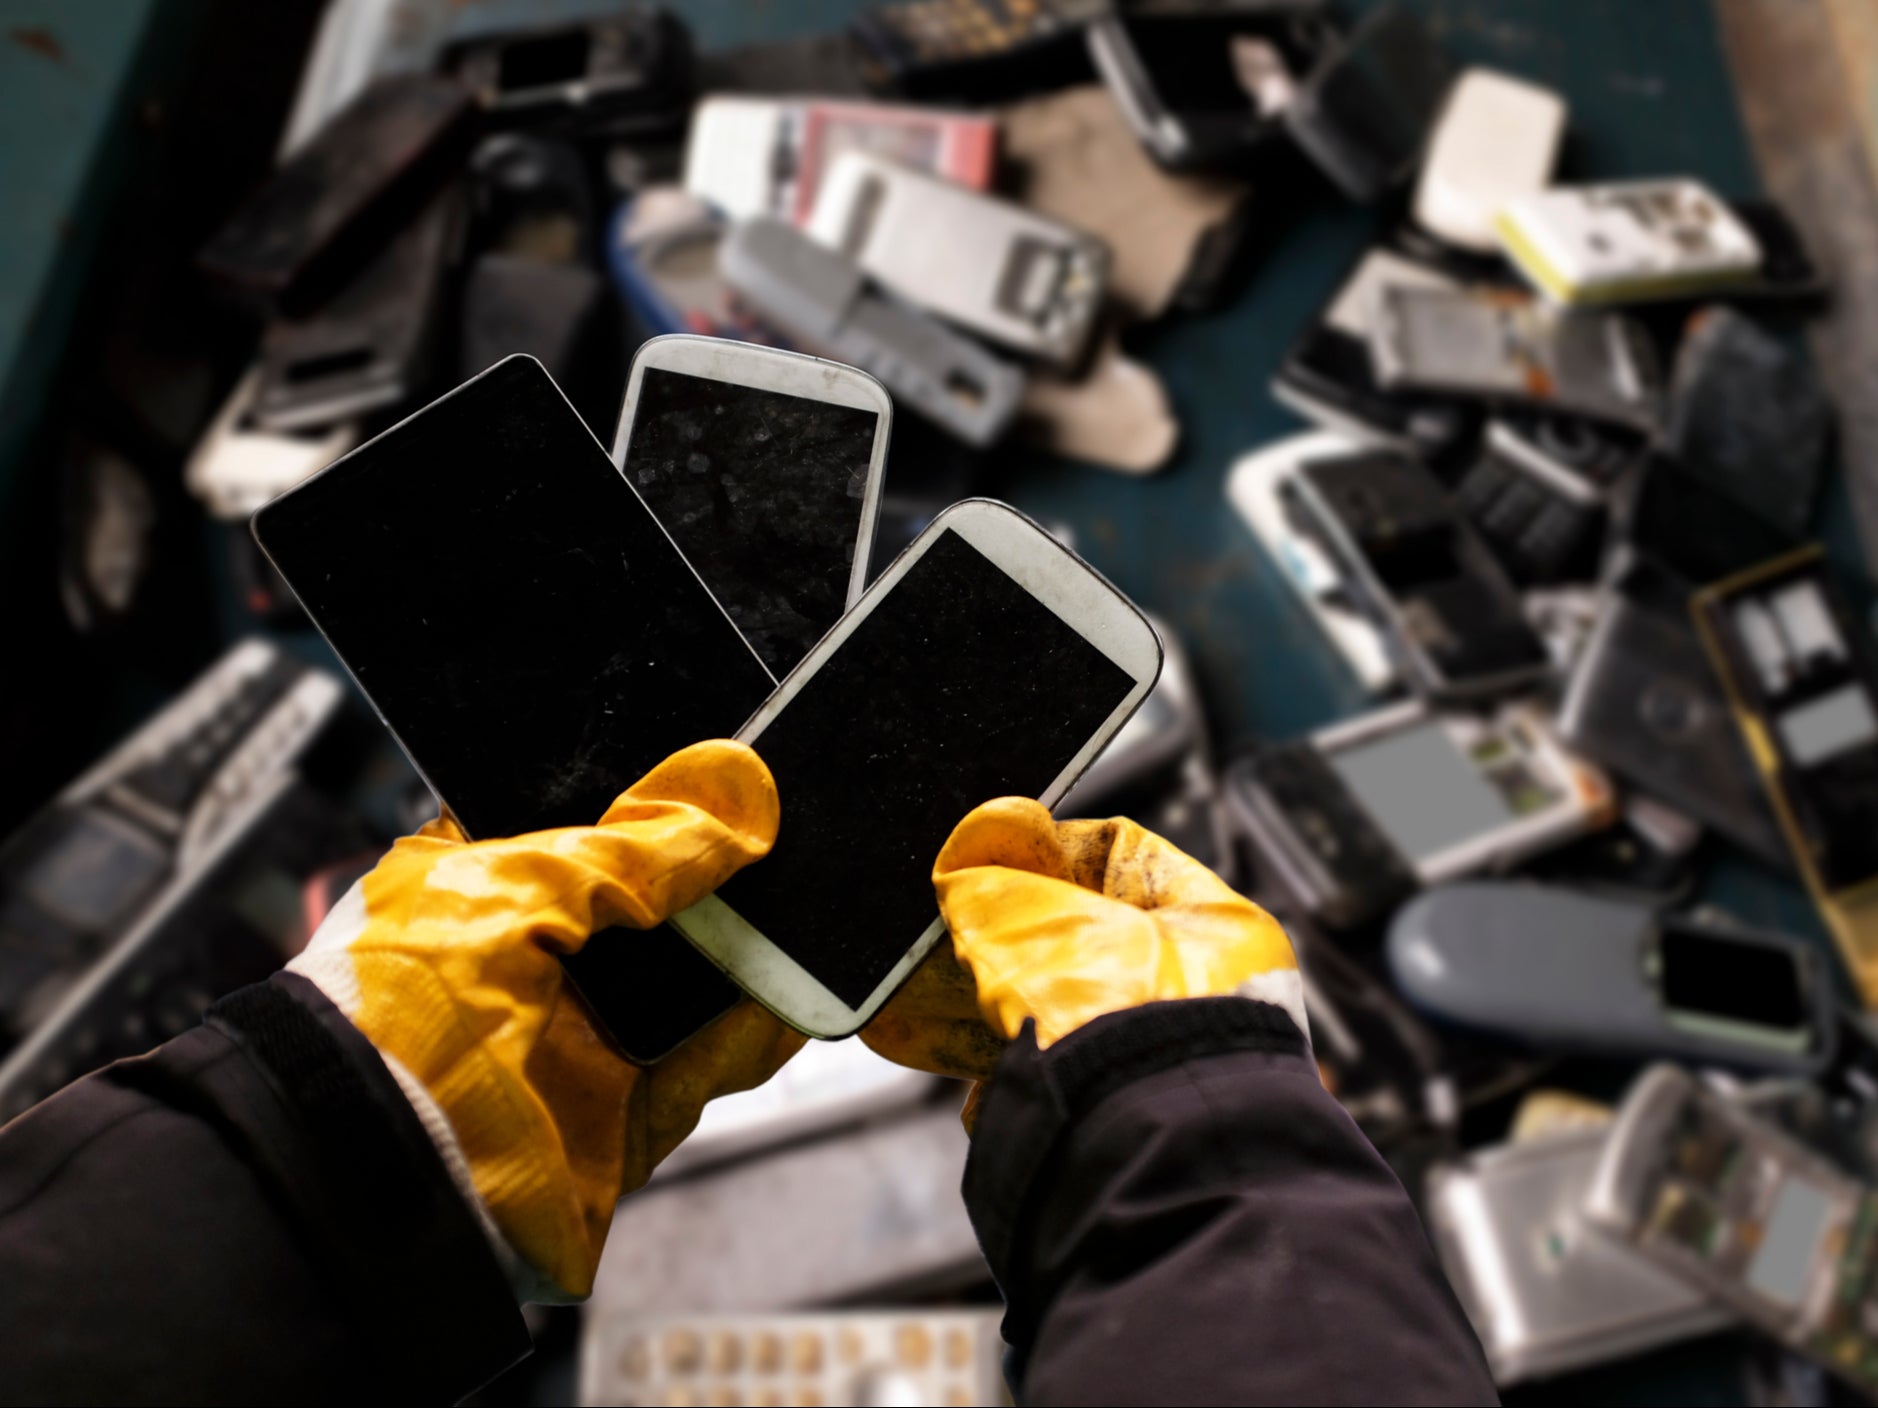 Electronic waste is the fastest growing waste stream in Europe